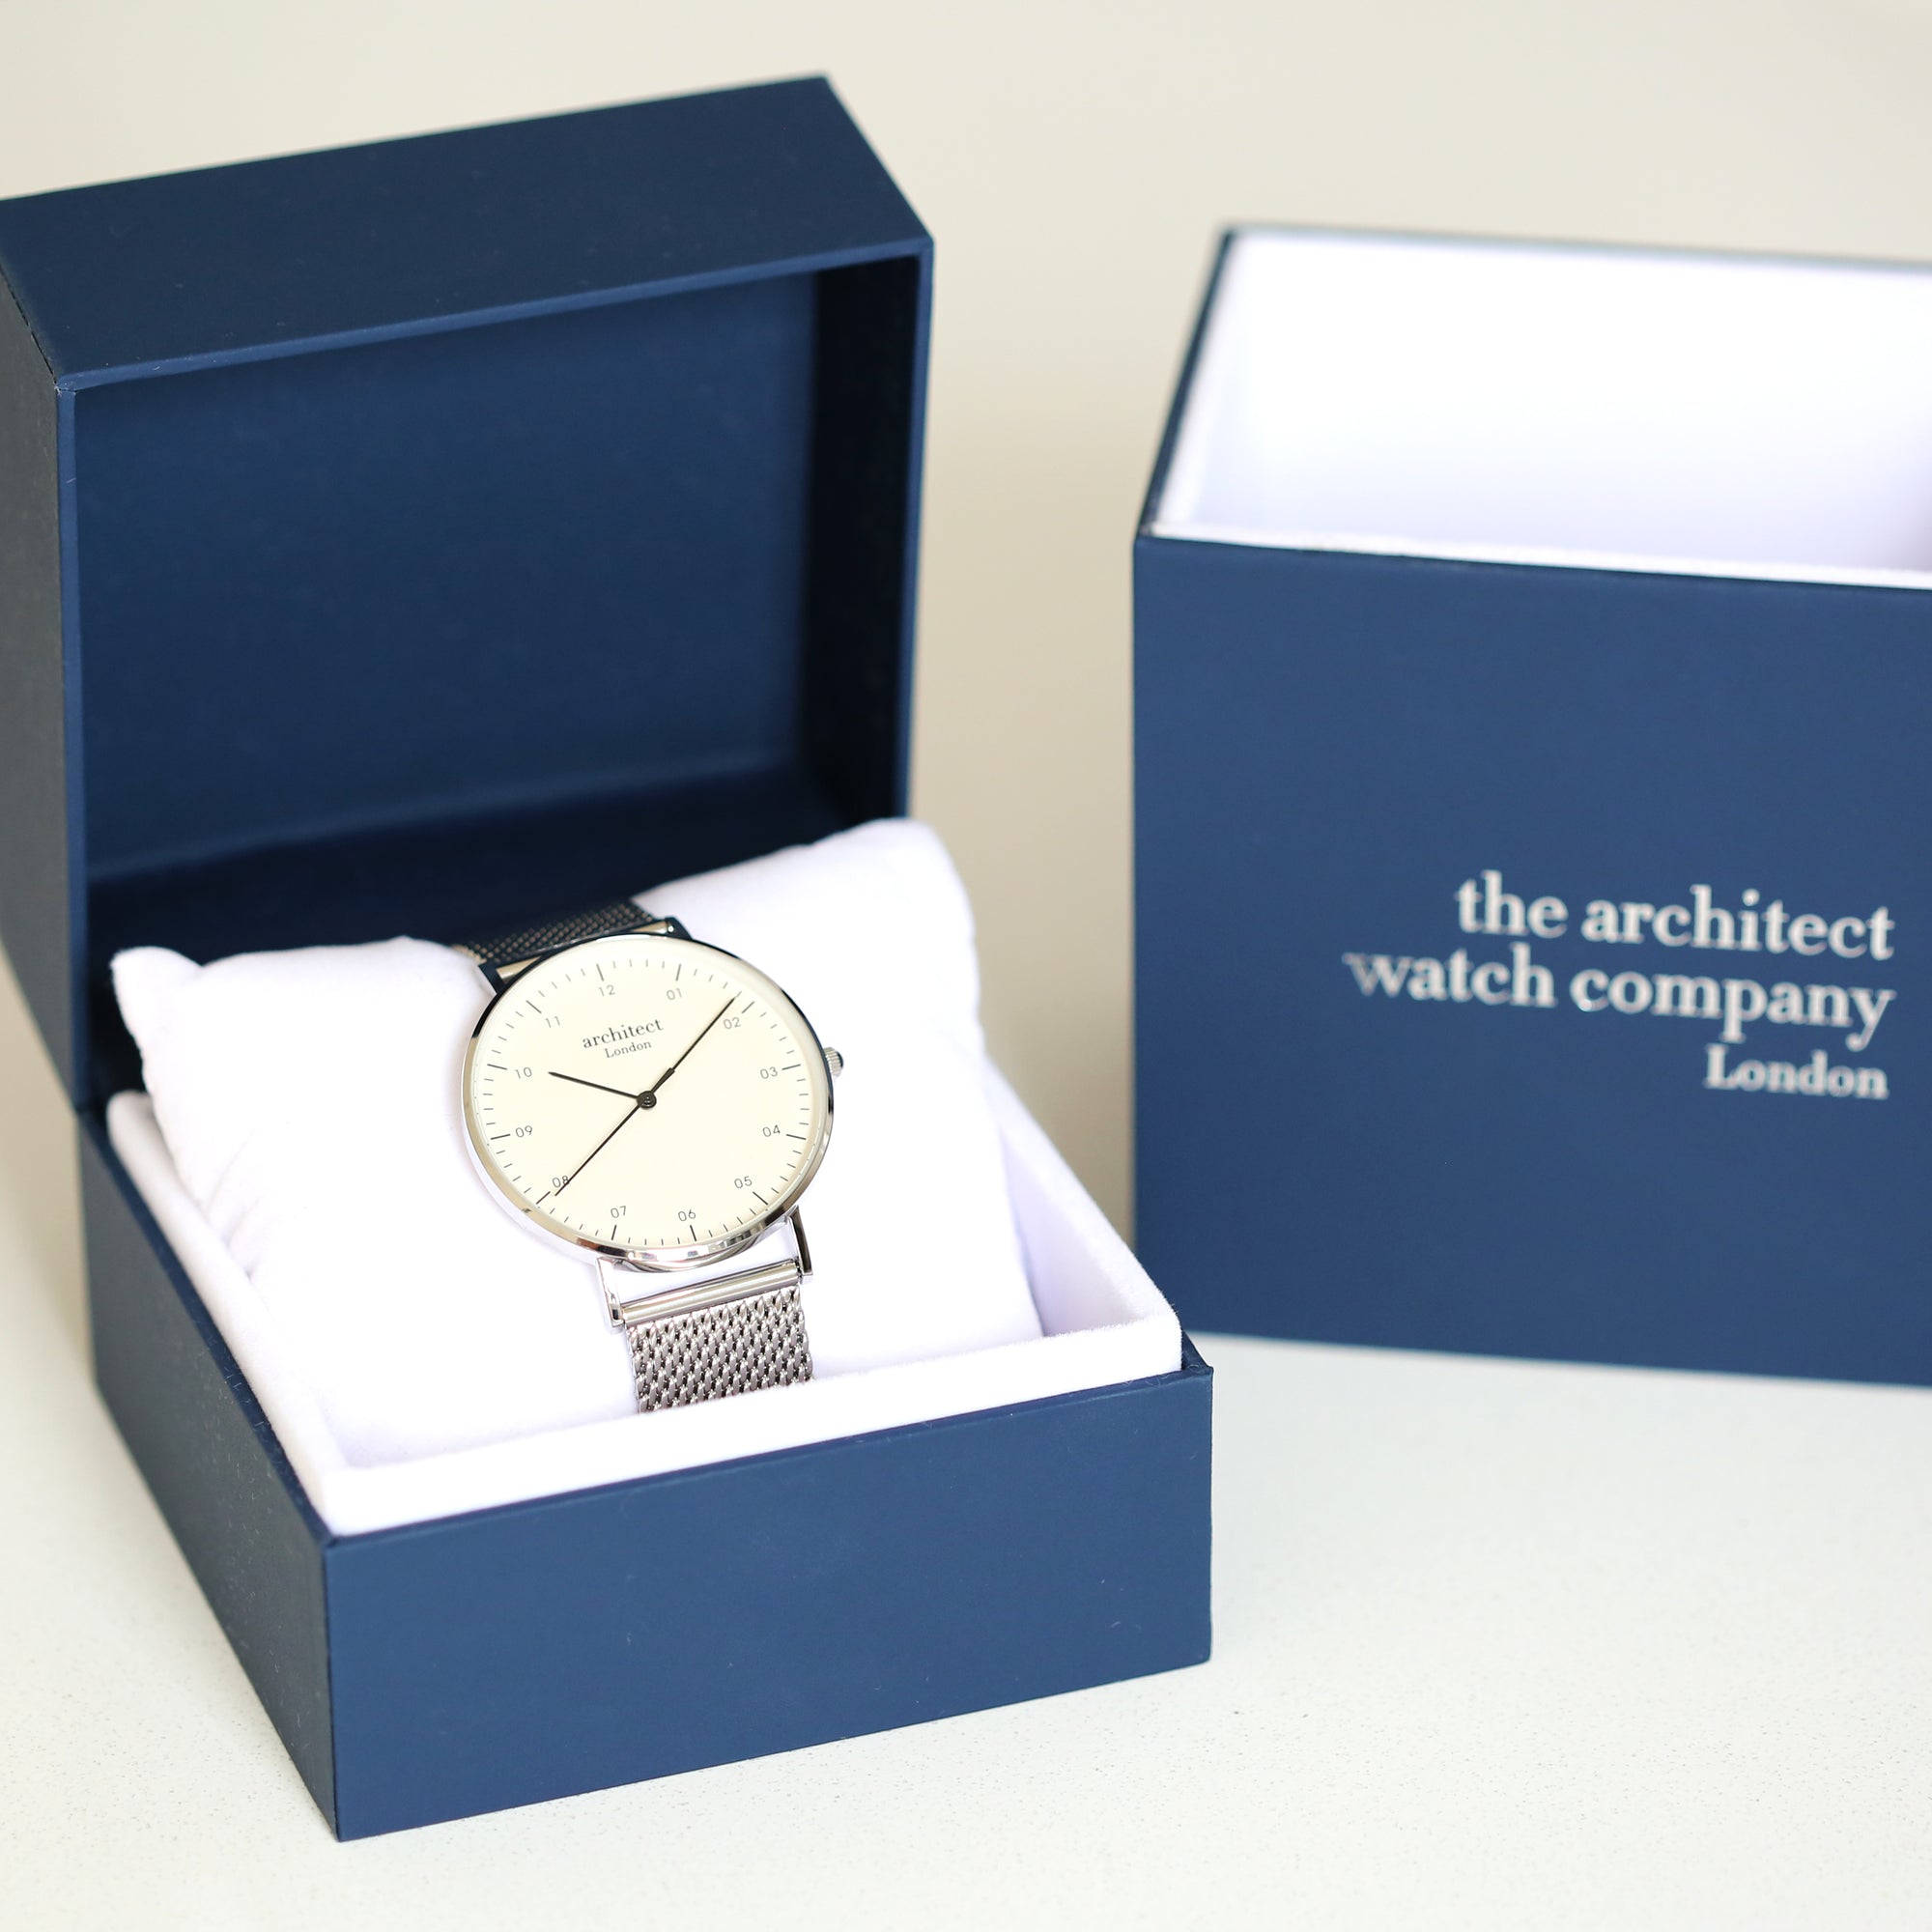 Image of a man's watch in a blue presentation box. The watch can be engraved on the back with your own handwriting. The watch is made by The Architect Watch Company London and has a large white face and a stainless steel mesh strap. The rear of the watch can be engraved with your message written in your own handwriting.